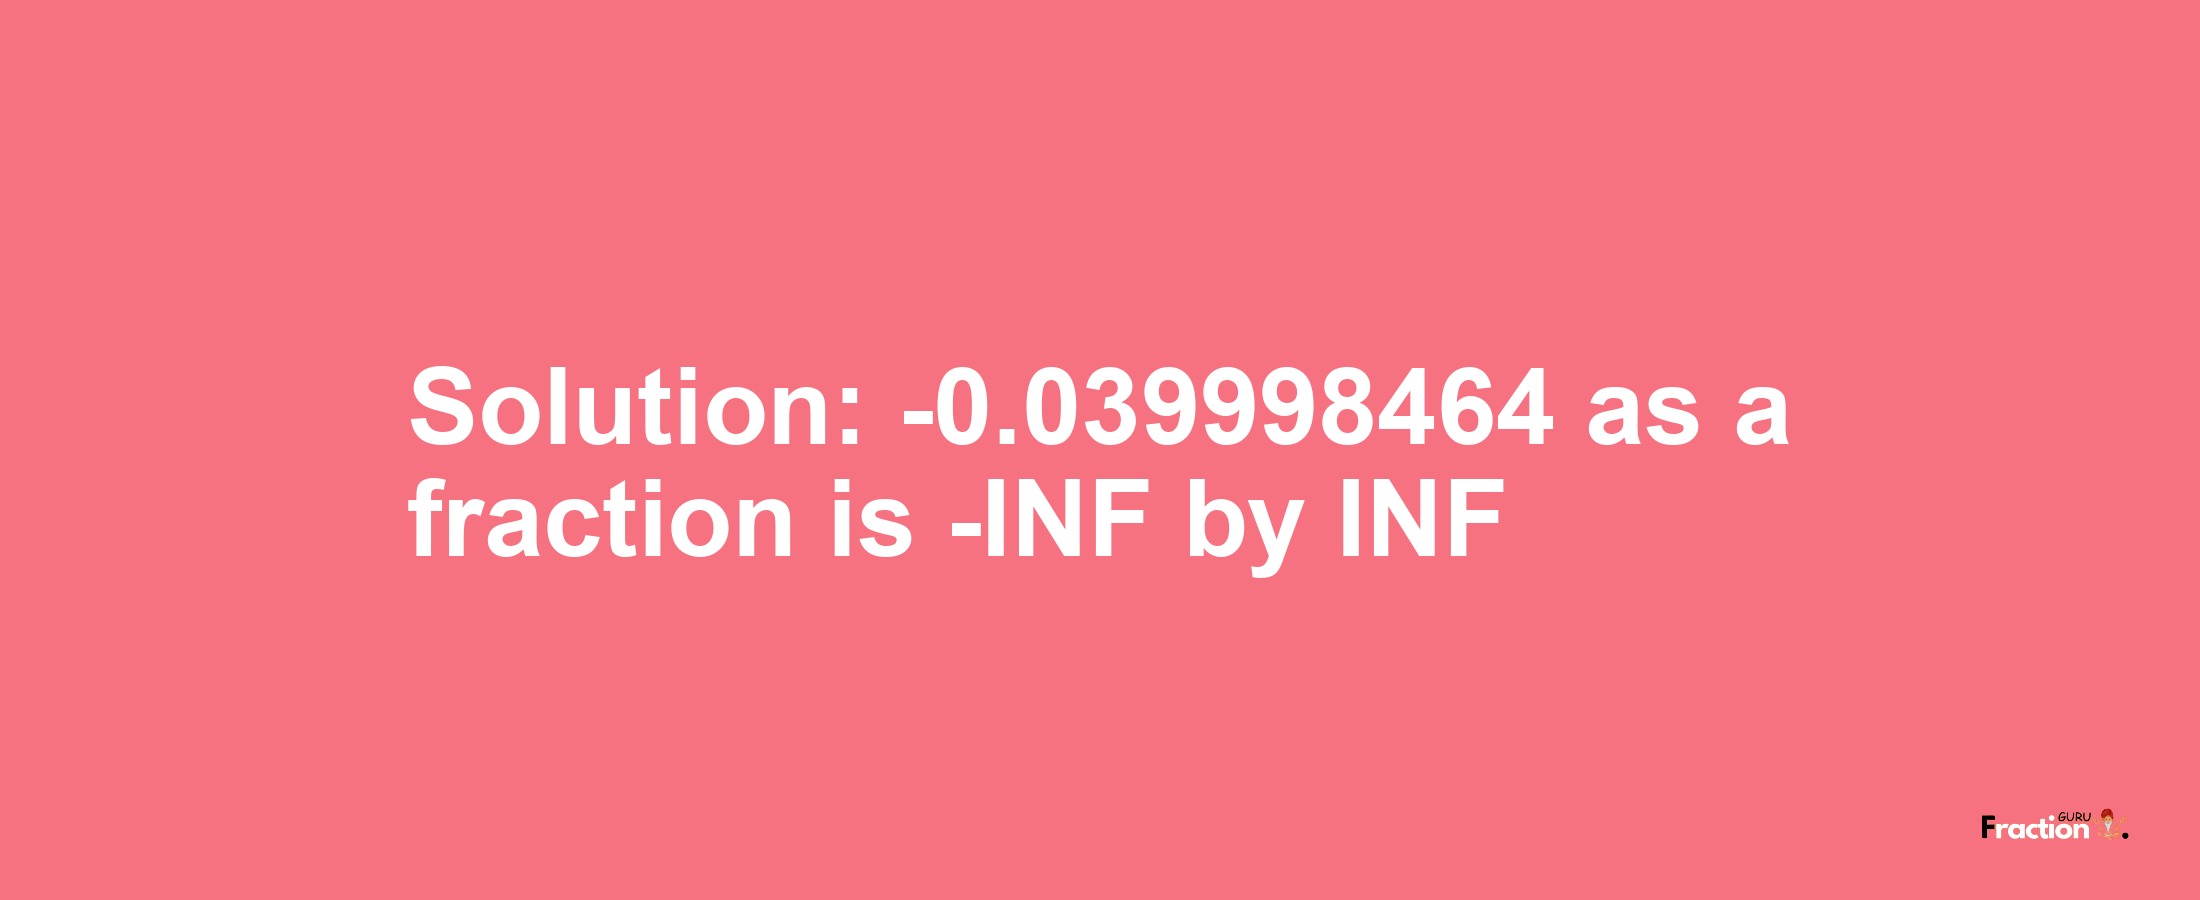 Solution:-0.039998464 as a fraction is -INF/INF